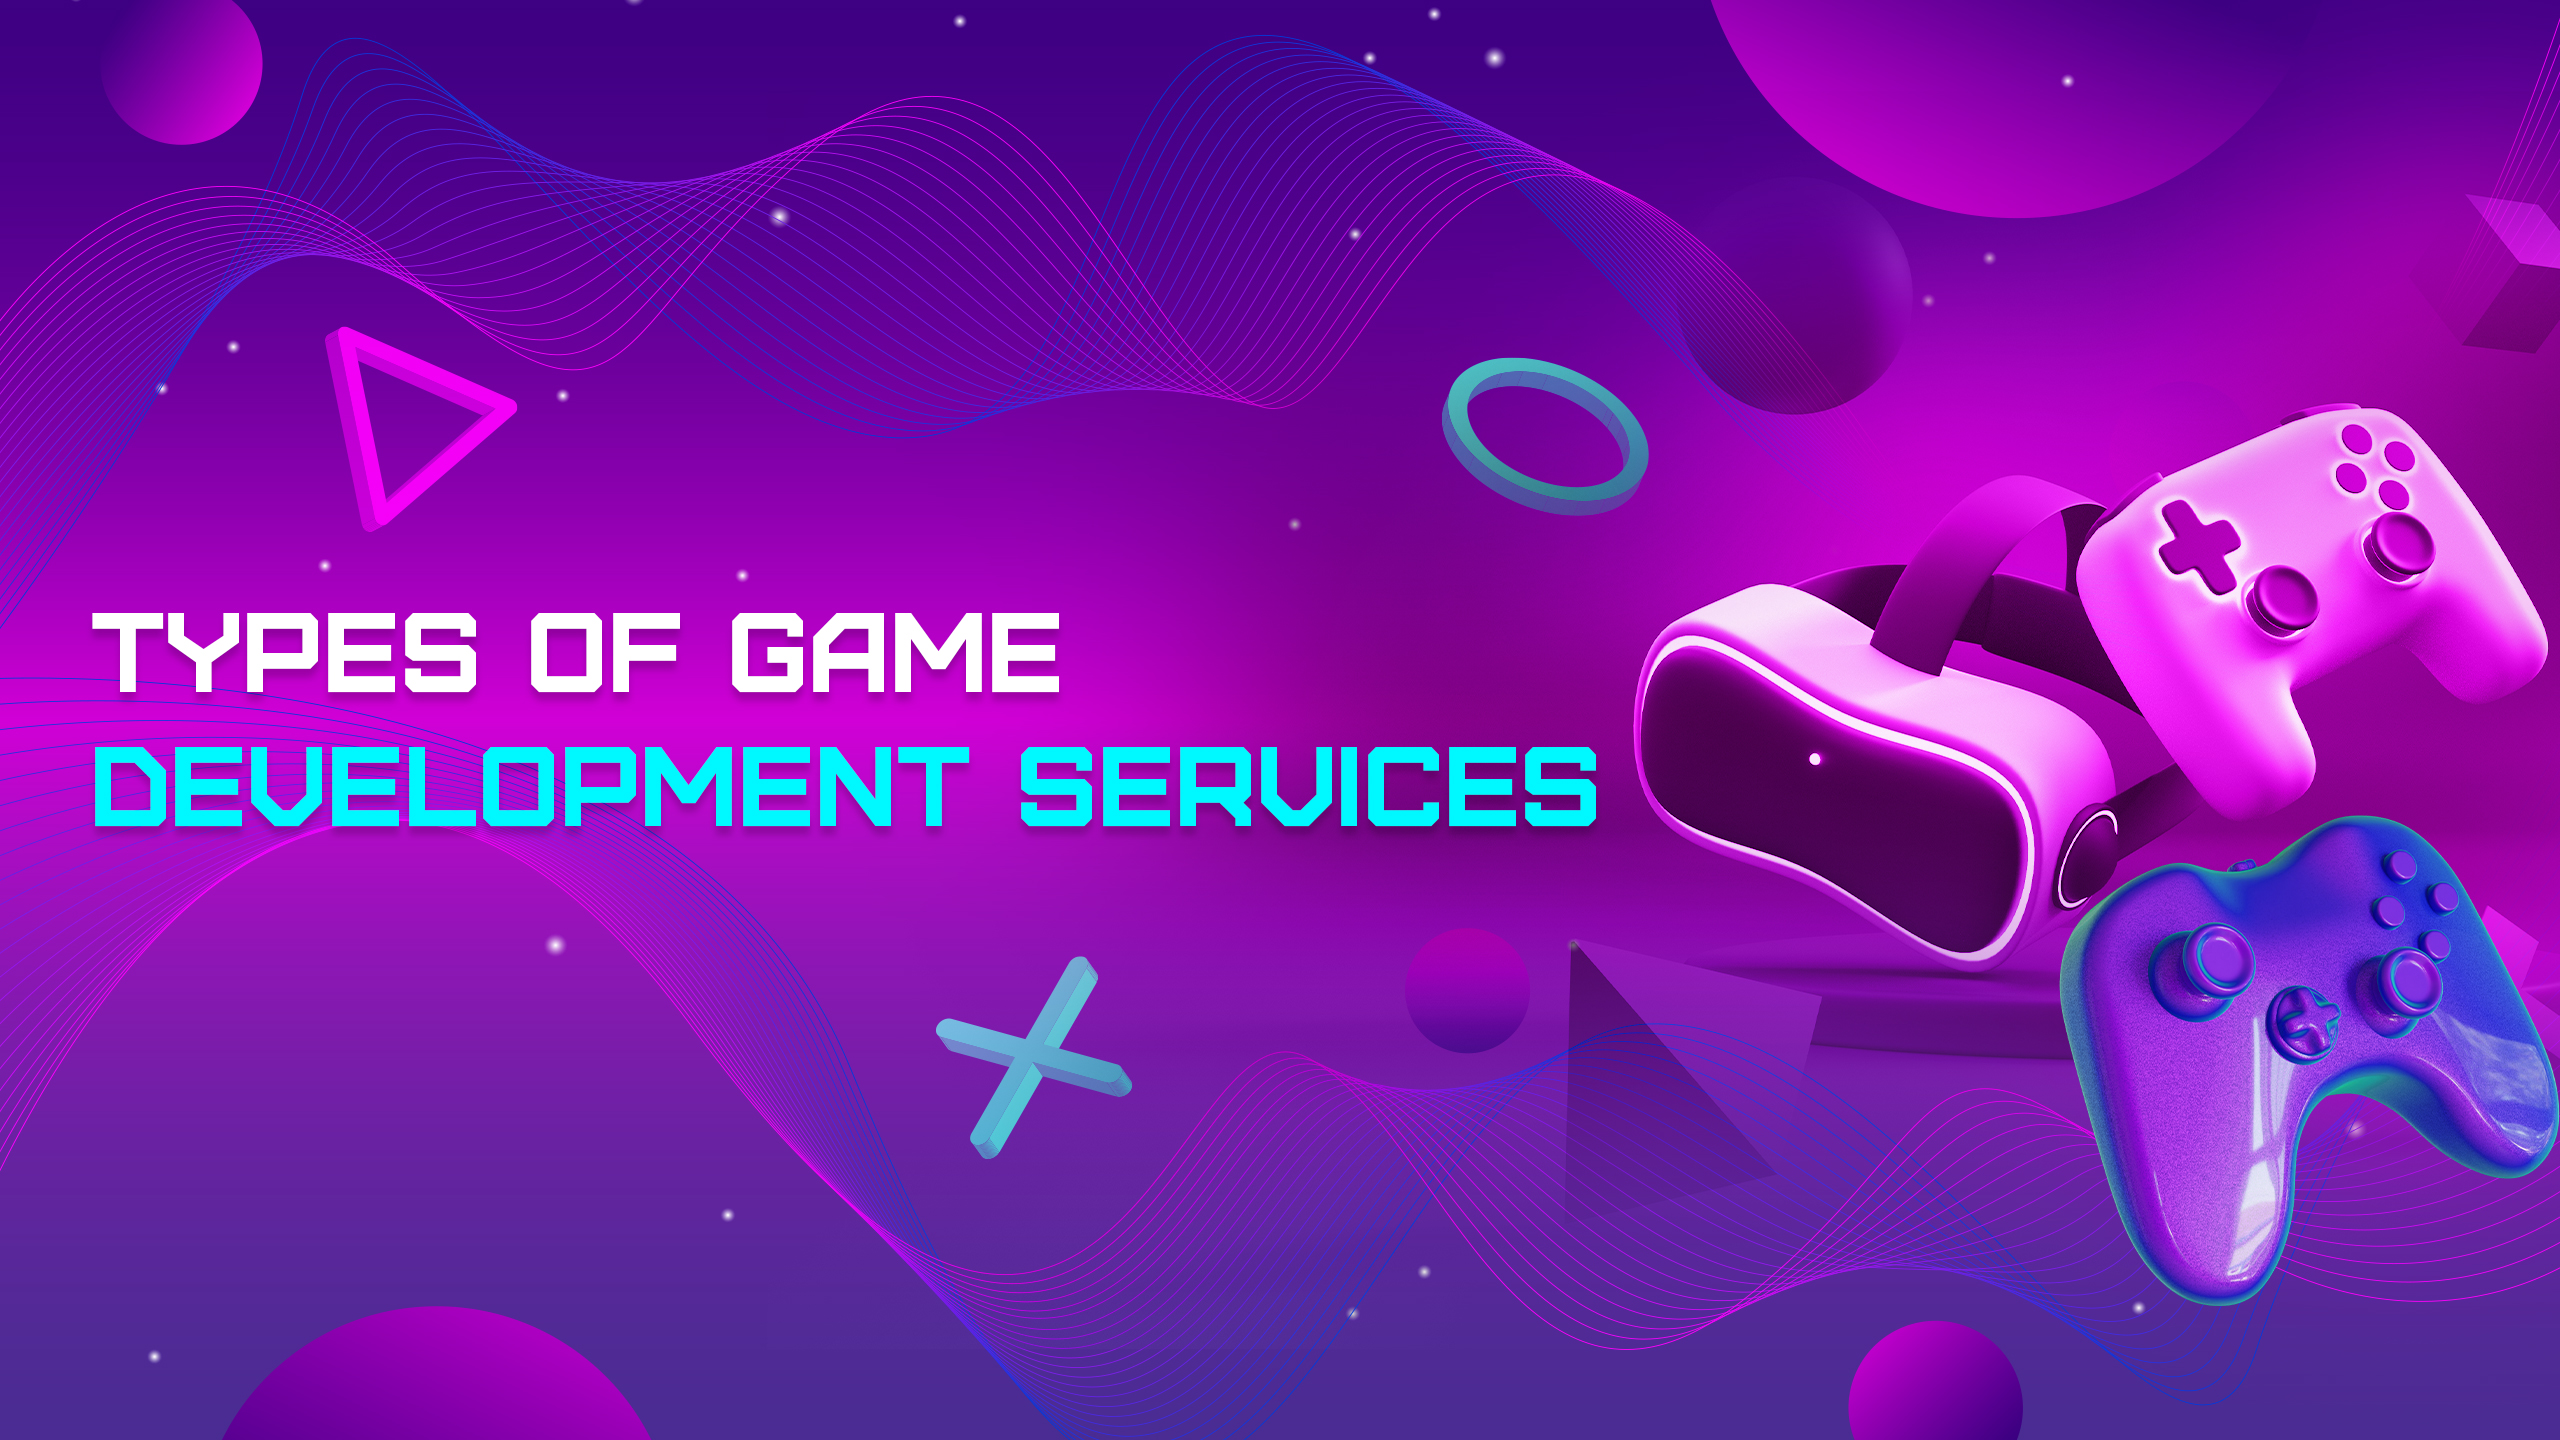 Types of Game Development Services